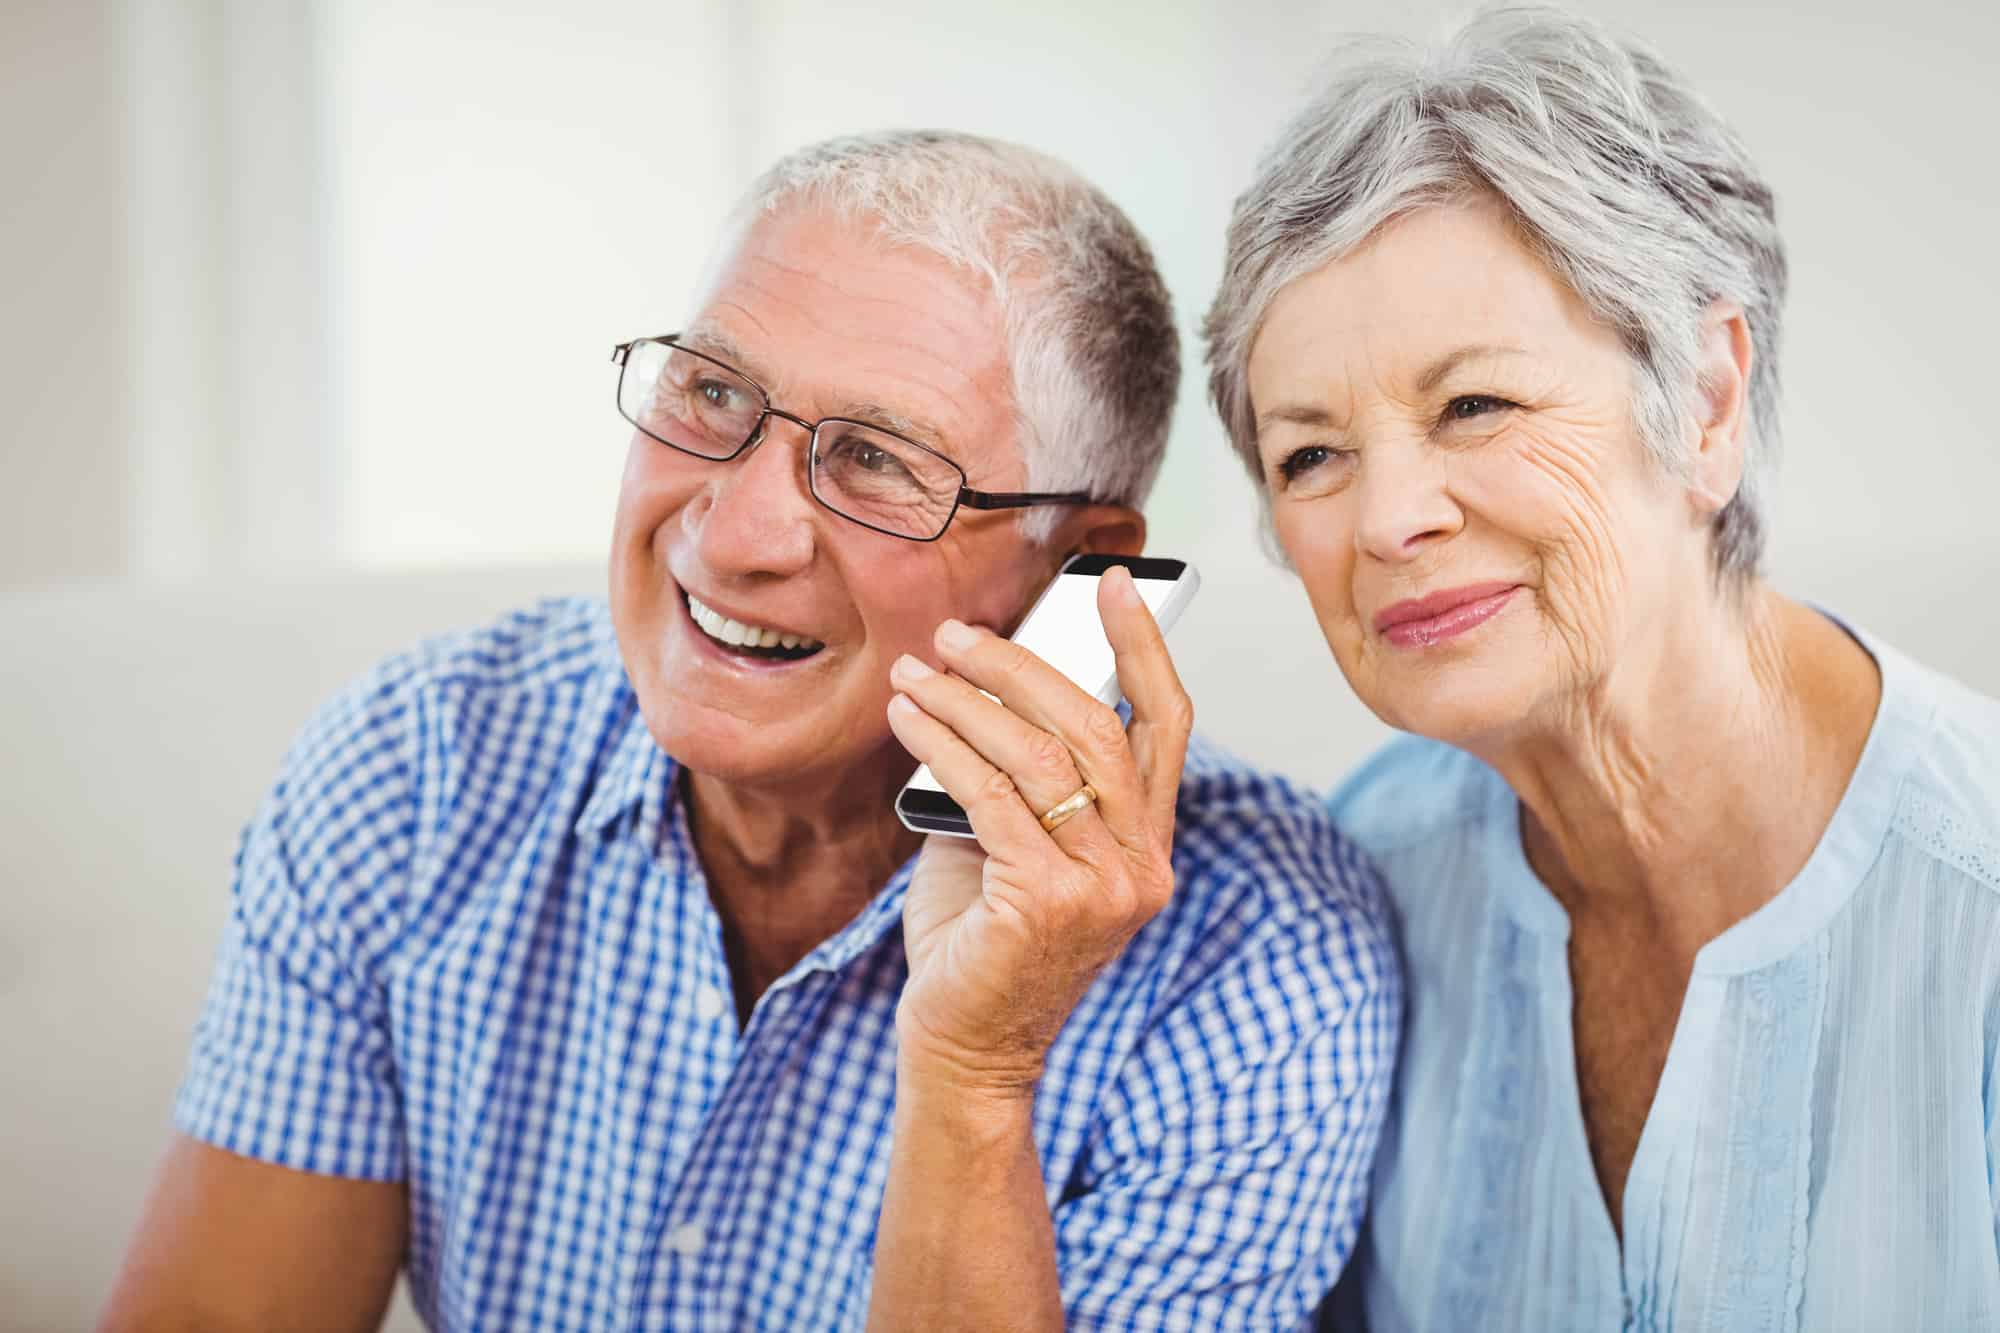 Simple Smart Phones About Page Header Elderly Couple Talking Image